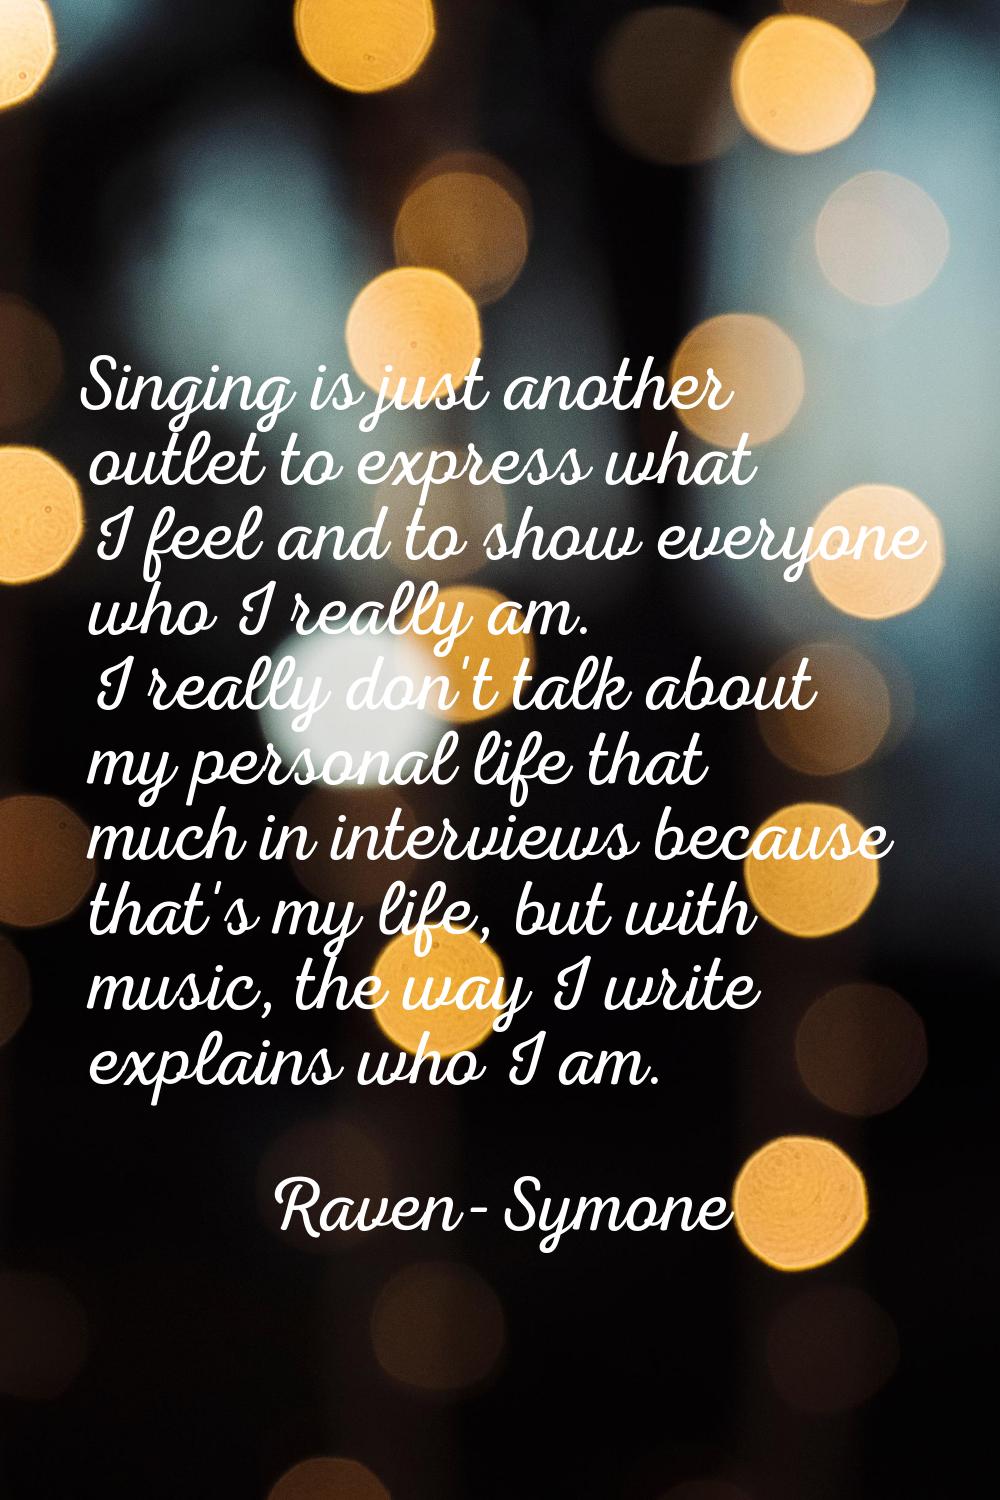 Singing is just another outlet to express what I feel and to show everyone who I really am. I reall